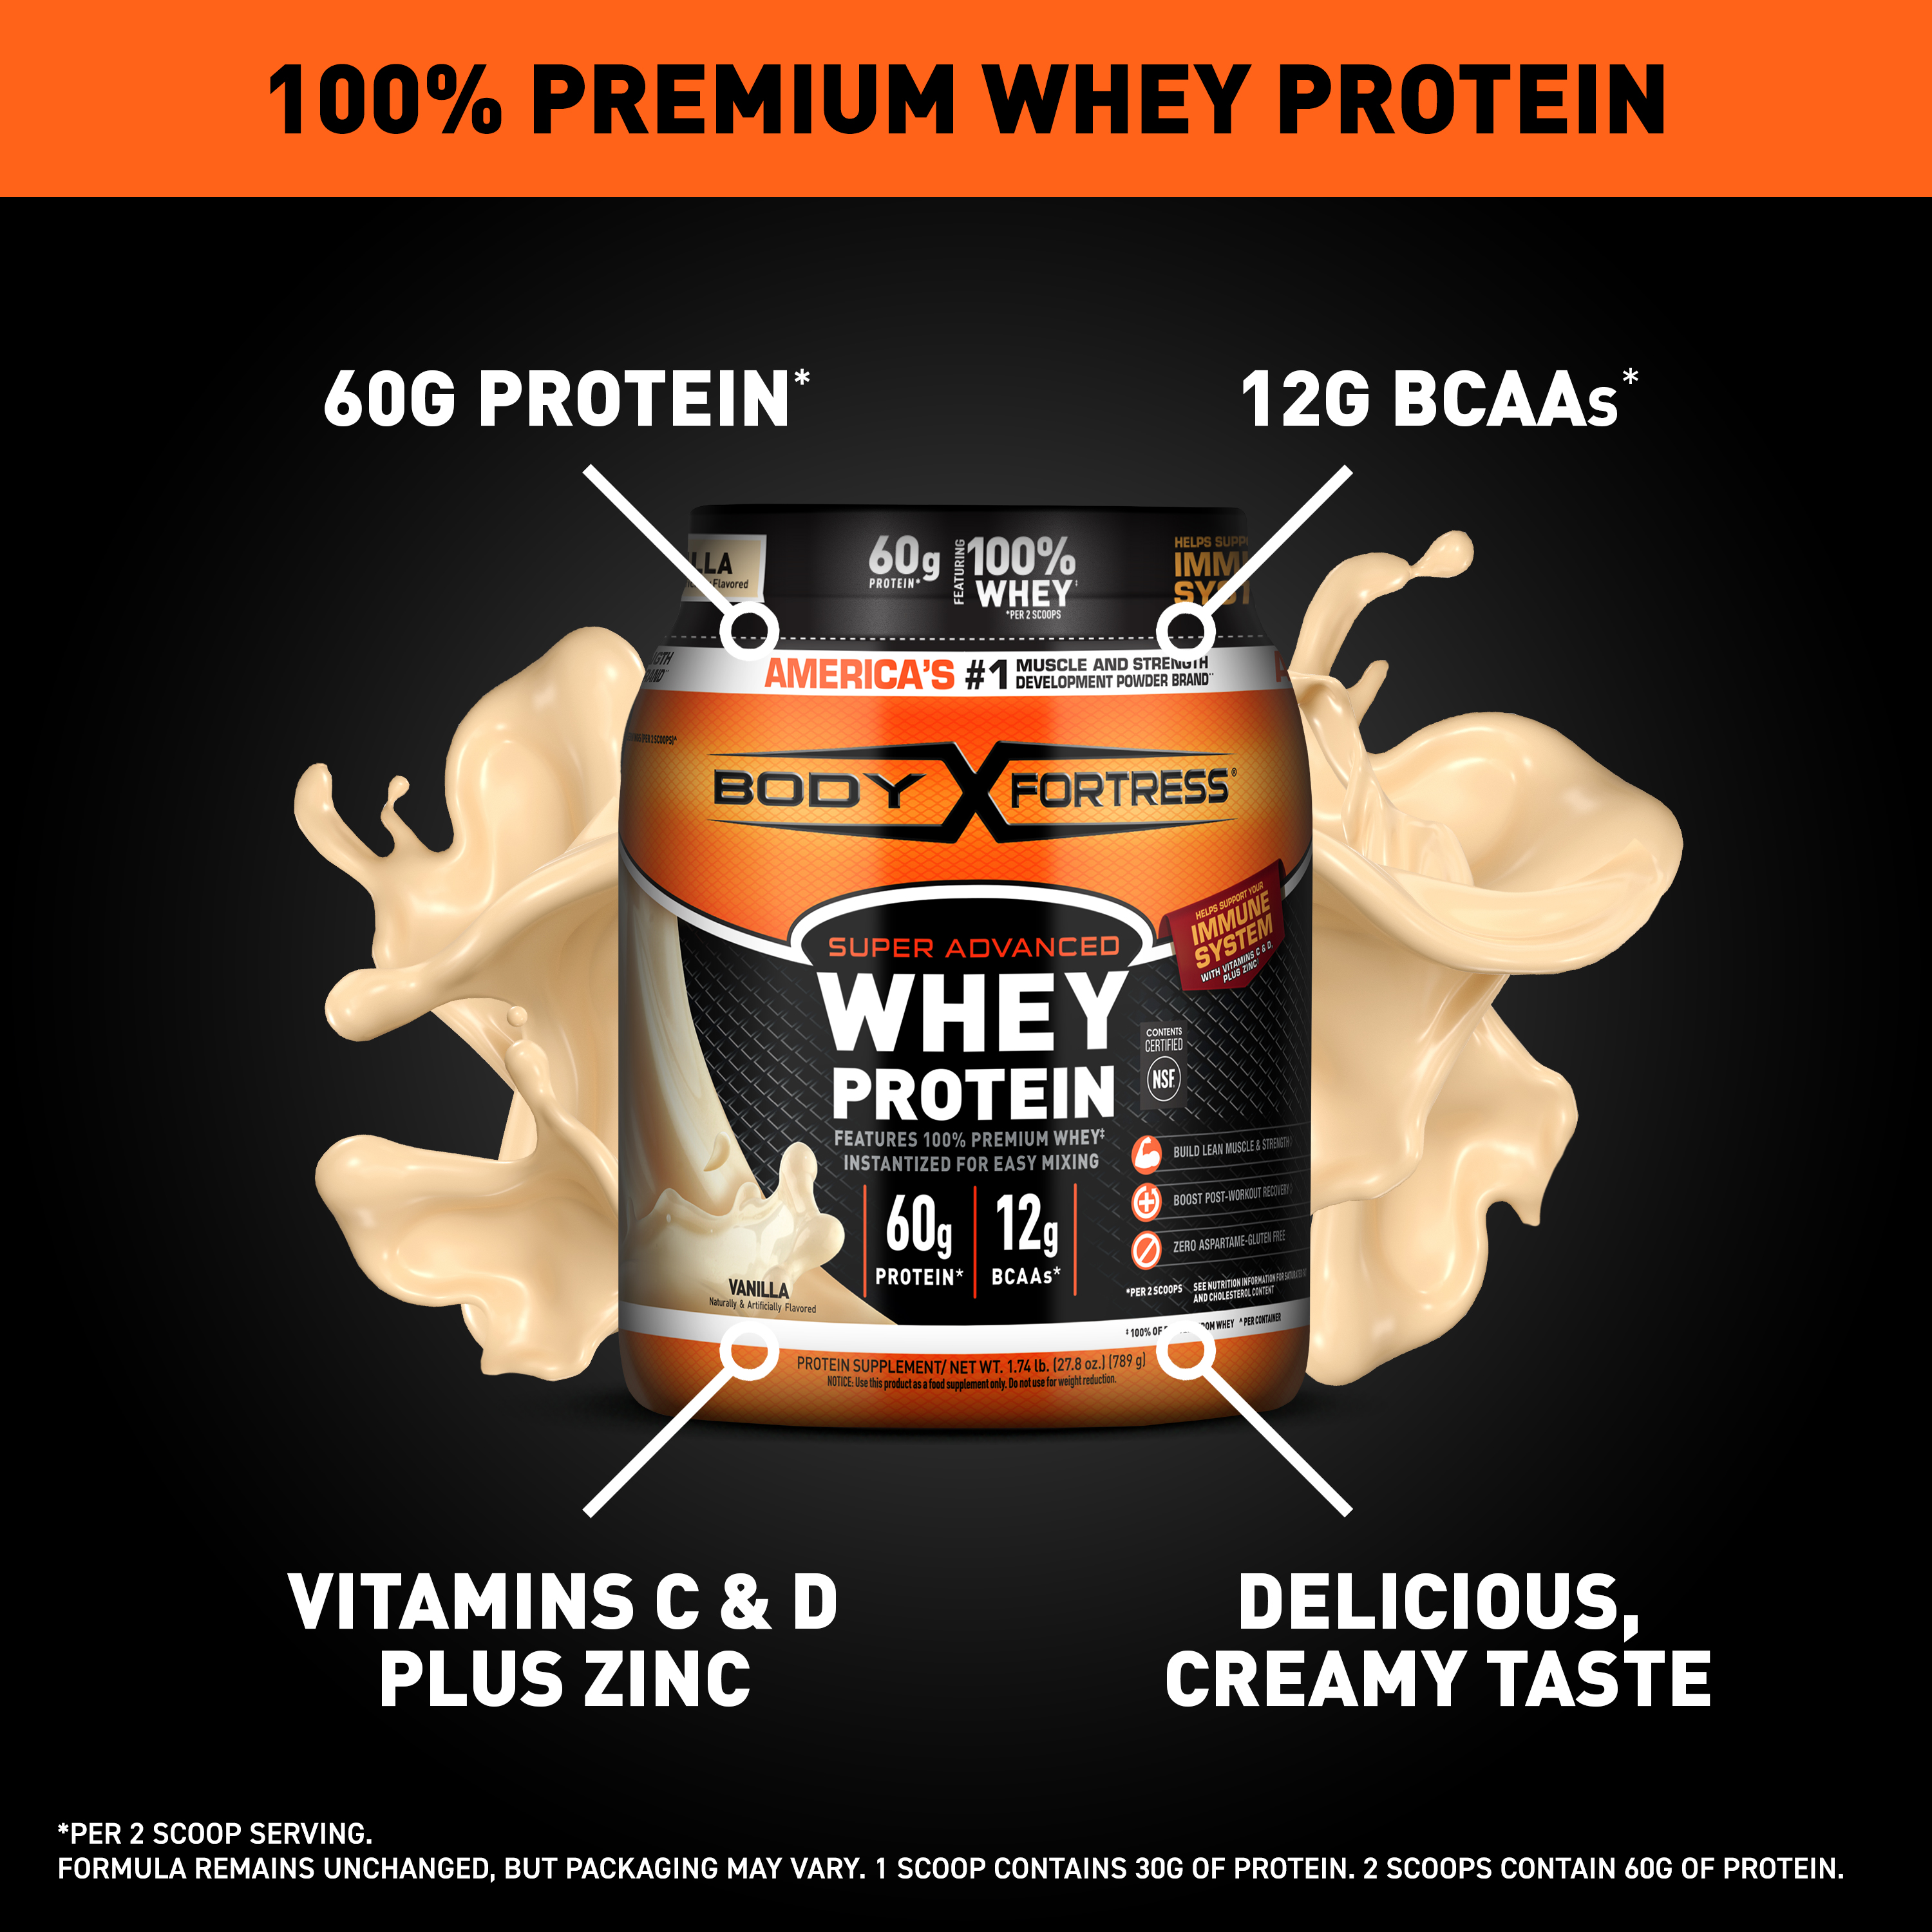 Body Fortress 100% Whey, Premium Protein Powder, Vanilla, 1.74lbs (Packaging May Vary) - image 2 of 7